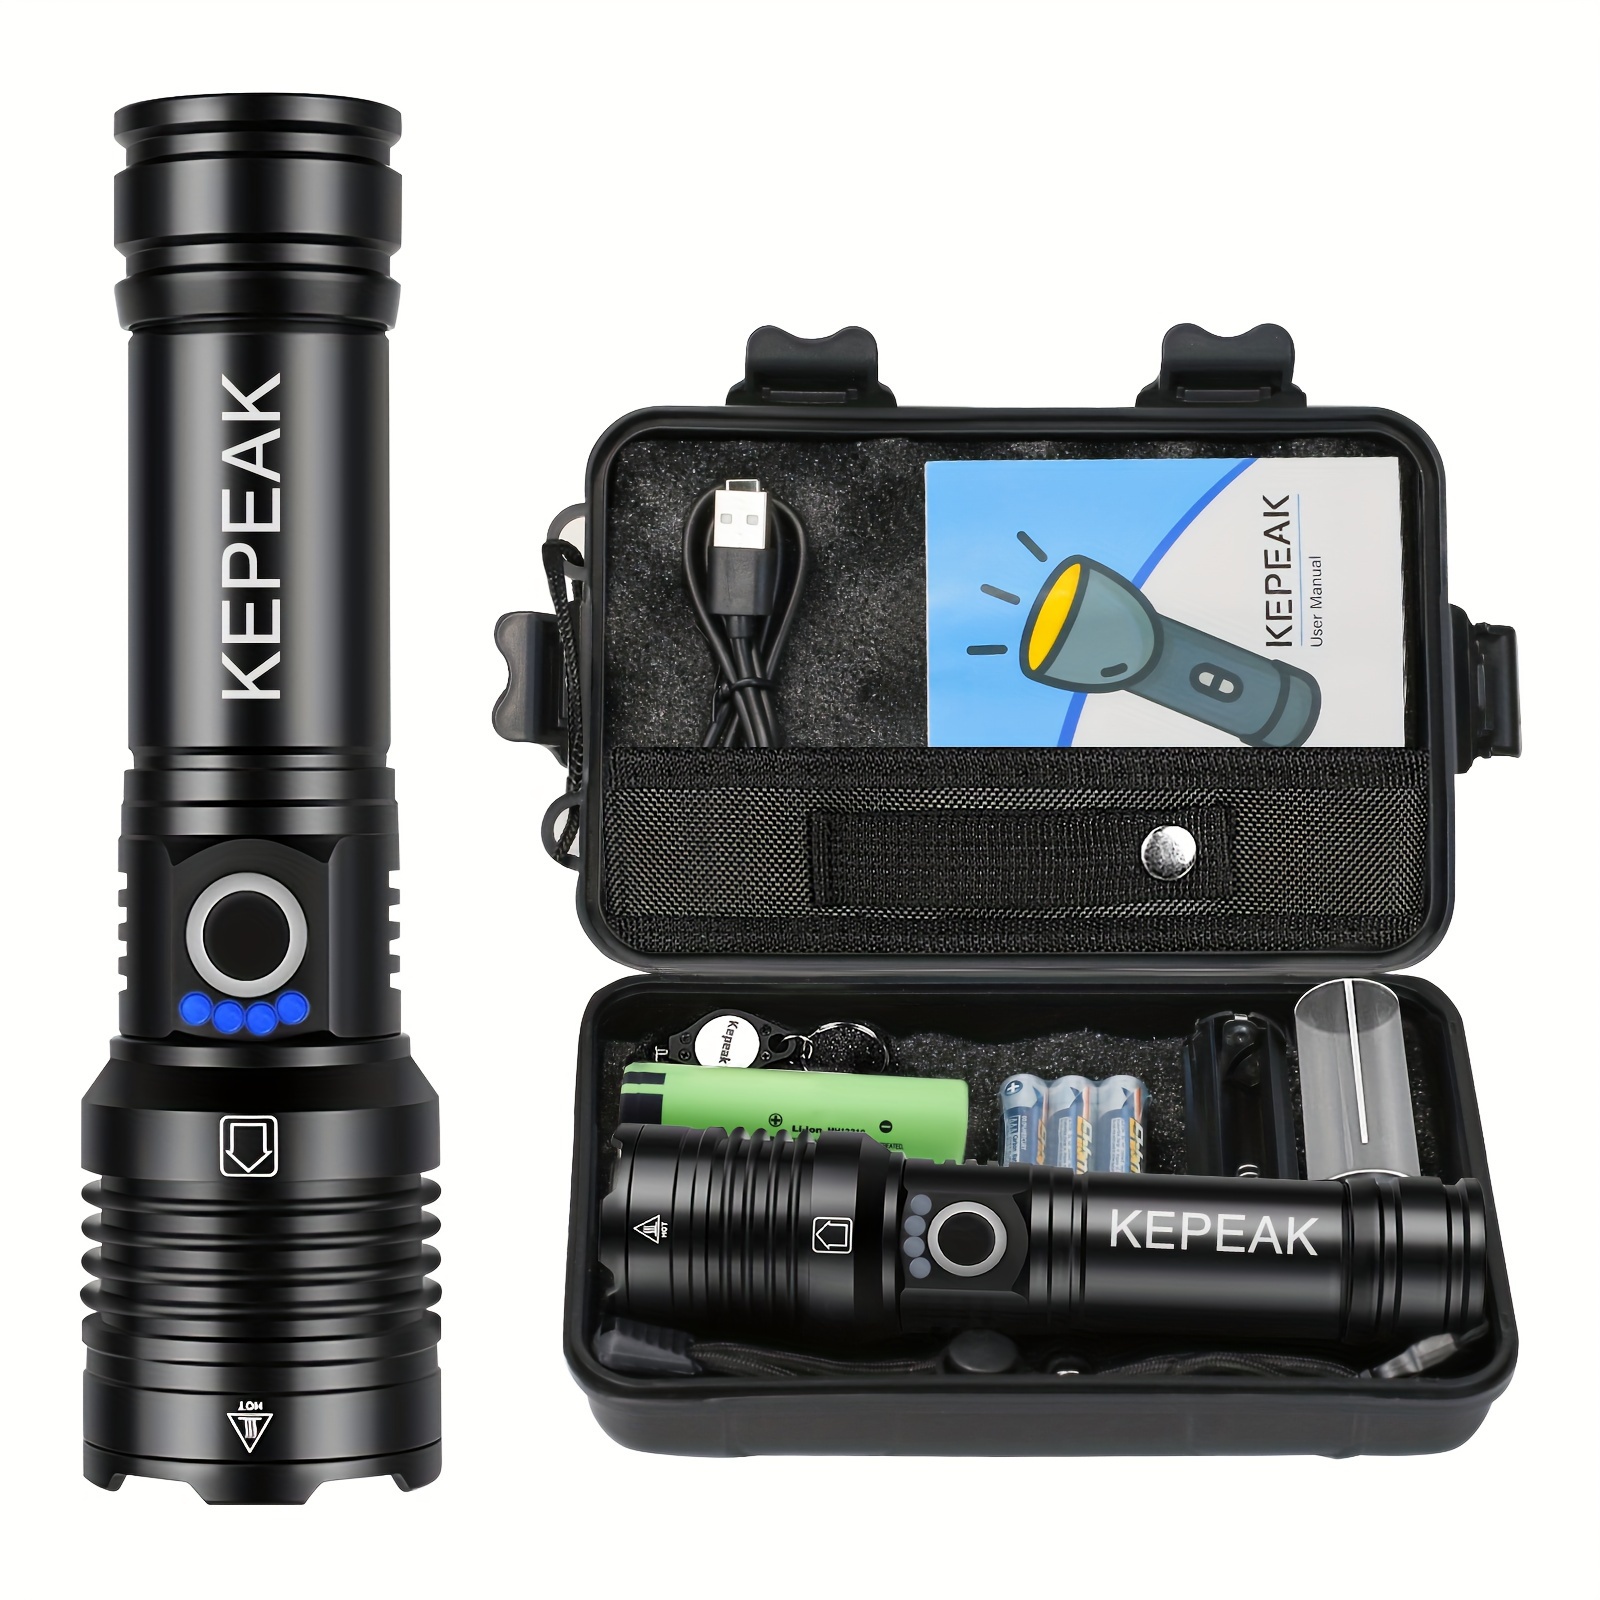 

Rechargeable High Lumens Led Flashlight - Super Bright - Tactical Zoom